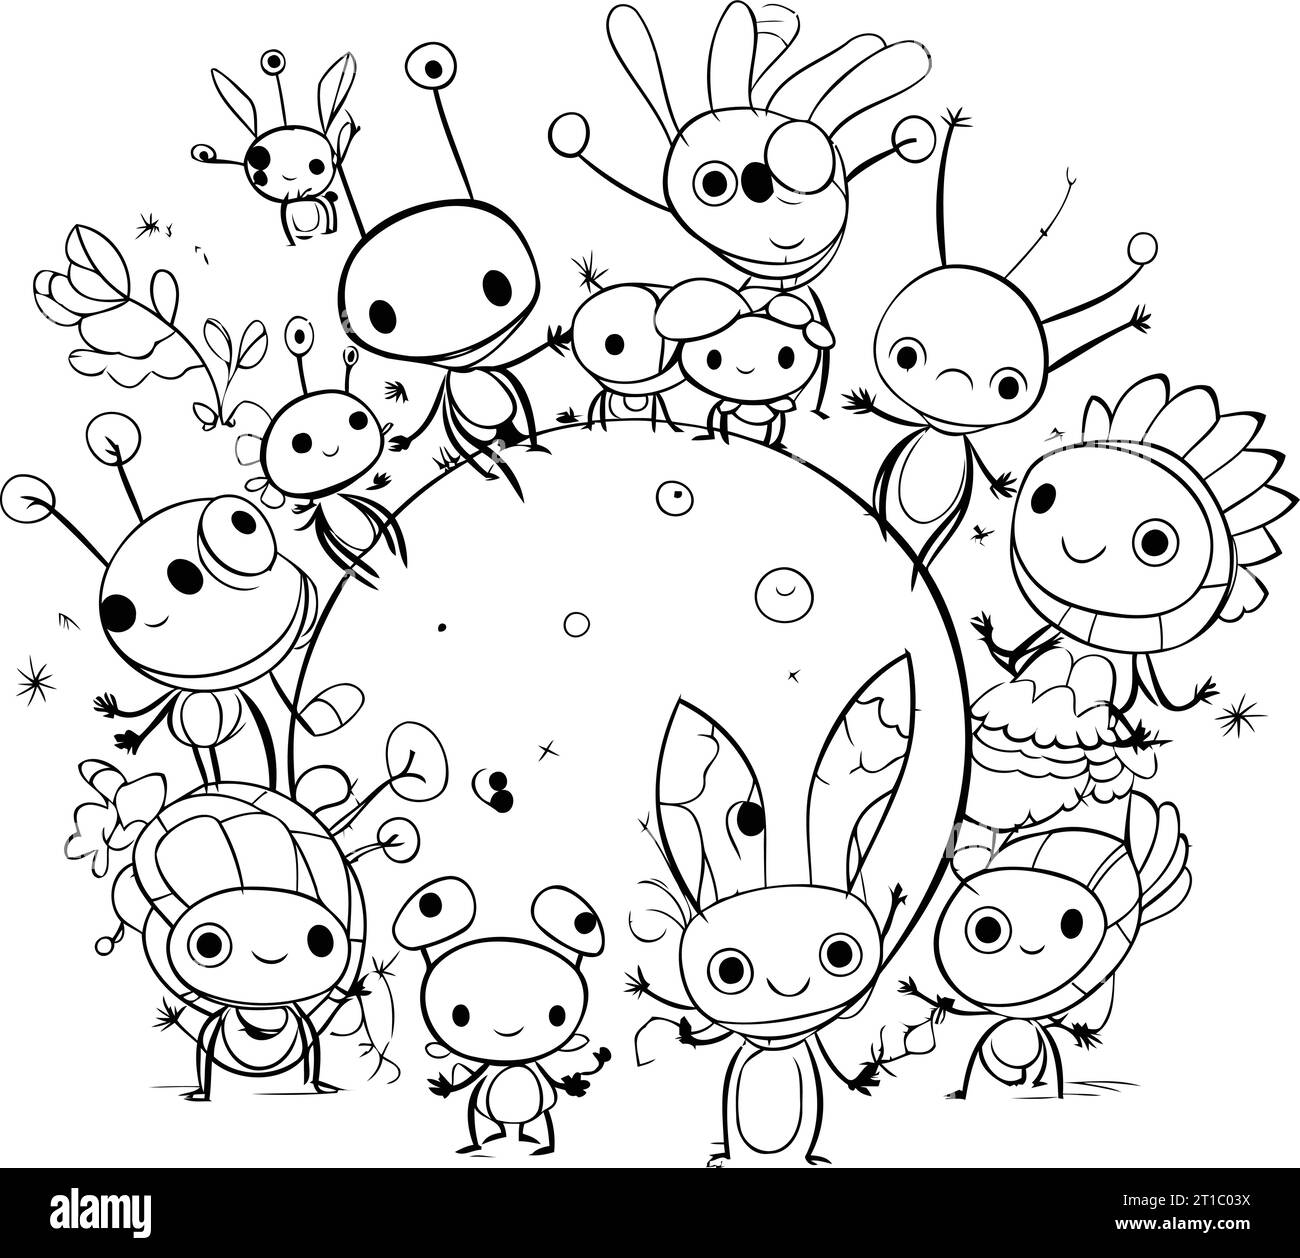 Circle of cute cartoon animals. Vector illustration. Black and white. Stock Vector